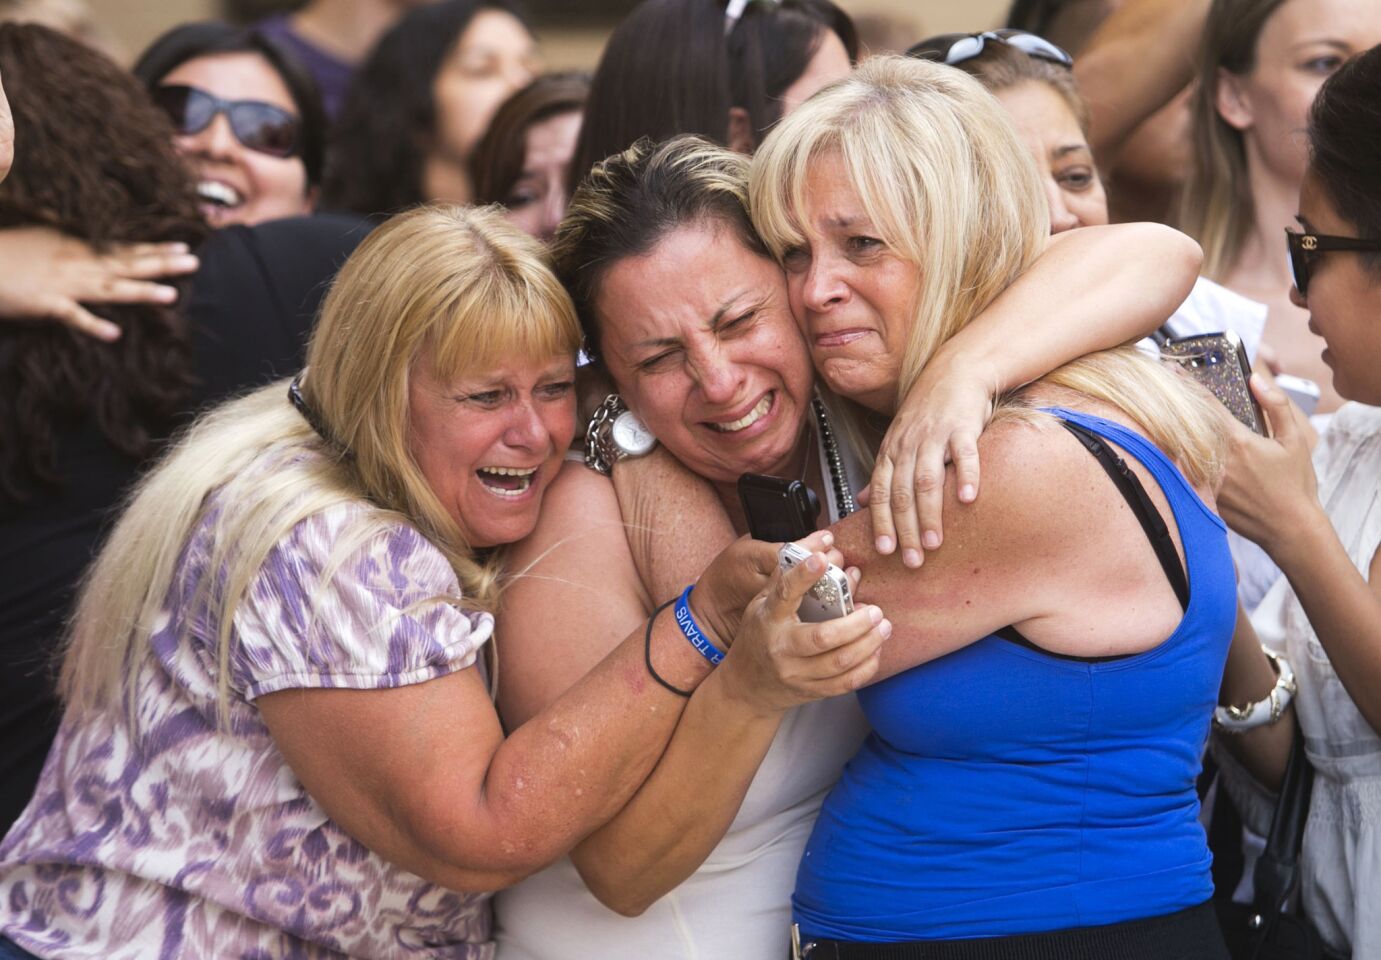 Kathy Brown, Virginia Aguiar and Jane Crook, react to a guilty verdict for Jodi Arias outside of Maricopa County Superior Court in Phoenix. Arias was convicted of first-degree murder in the gruesome killing of her one-time boyfriend in Arizona after a four-month trial that captured headlines with lurid tales of sex, lies, religion and a salacious relationship that ended in a blood bath.